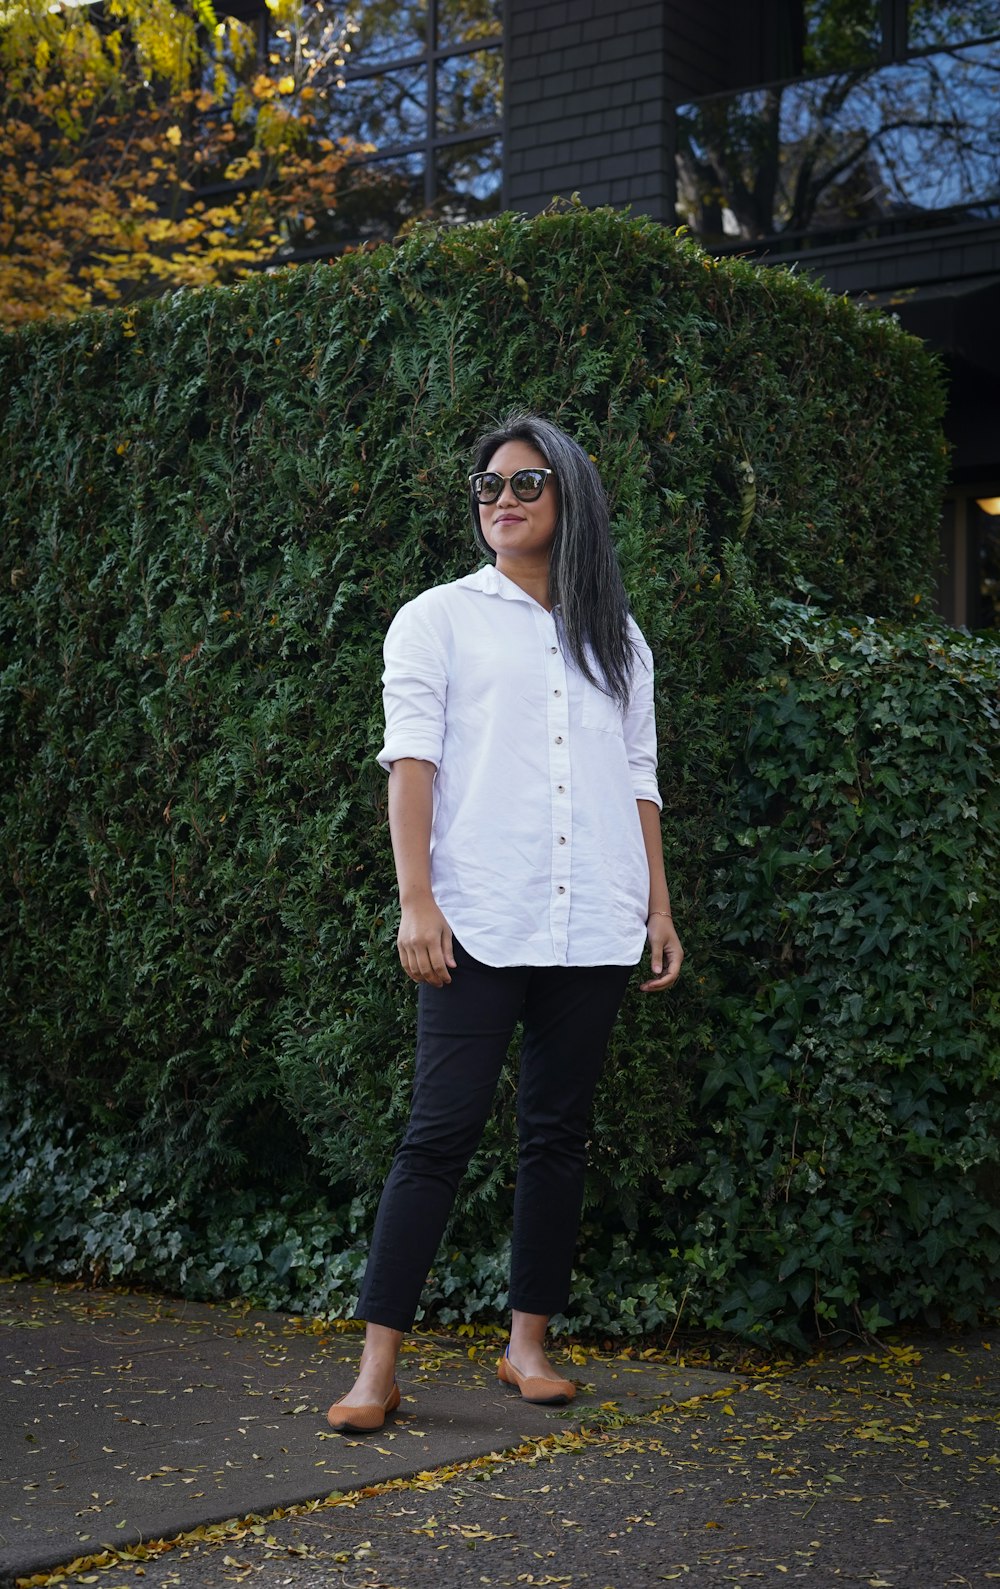 Woman in white button up shirt and black pants standing near green plants  during daytime photo – Free Grey Image on Unsplash